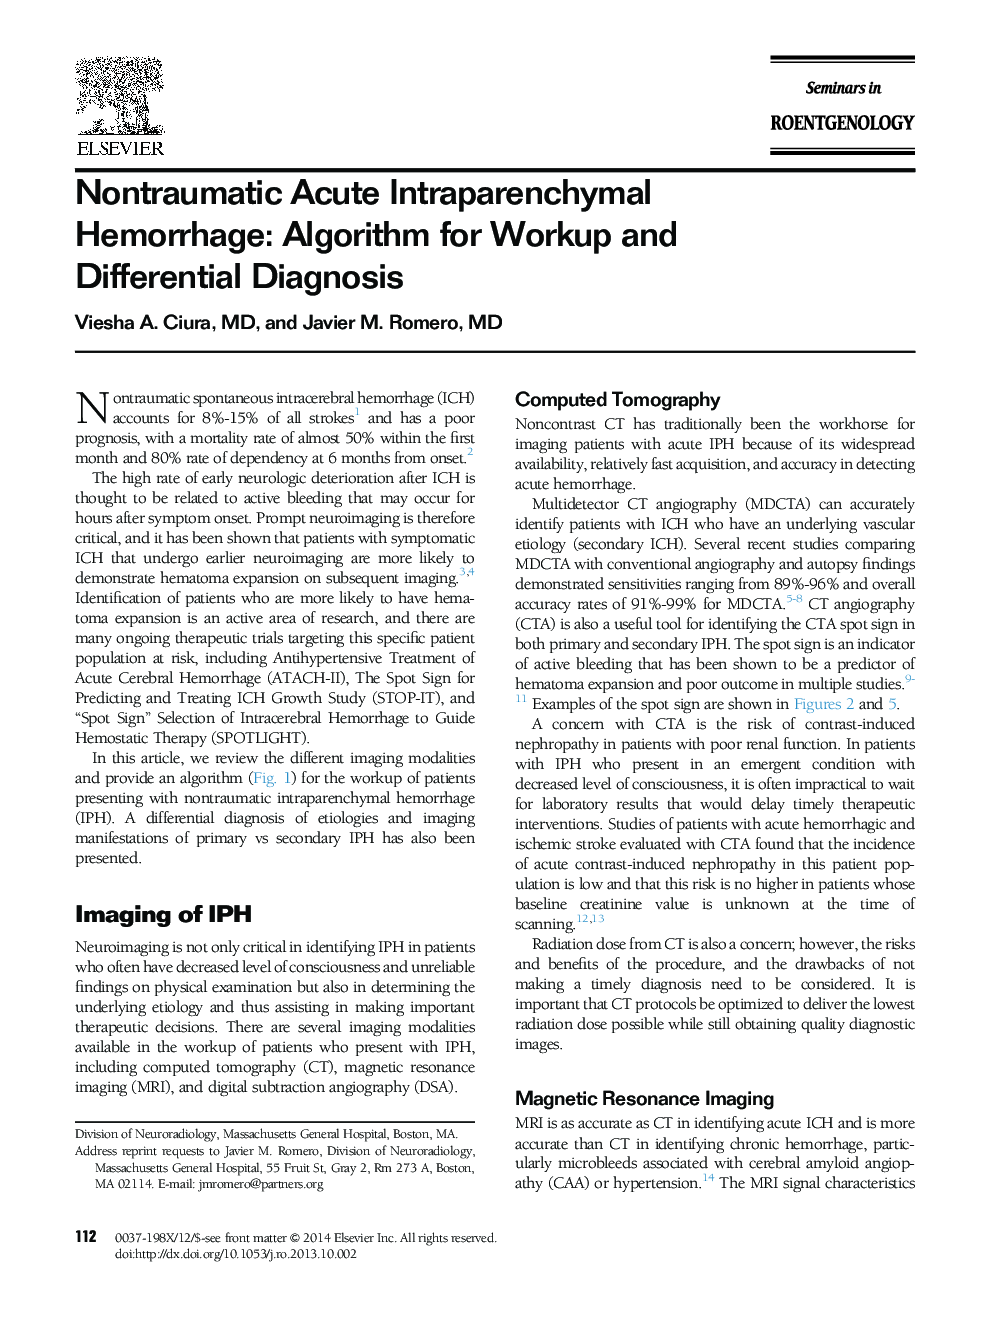 Nontraumatic Acute Intraparenchymal Hemorrhage: Algorithm for Workup and Differential Diagnosis